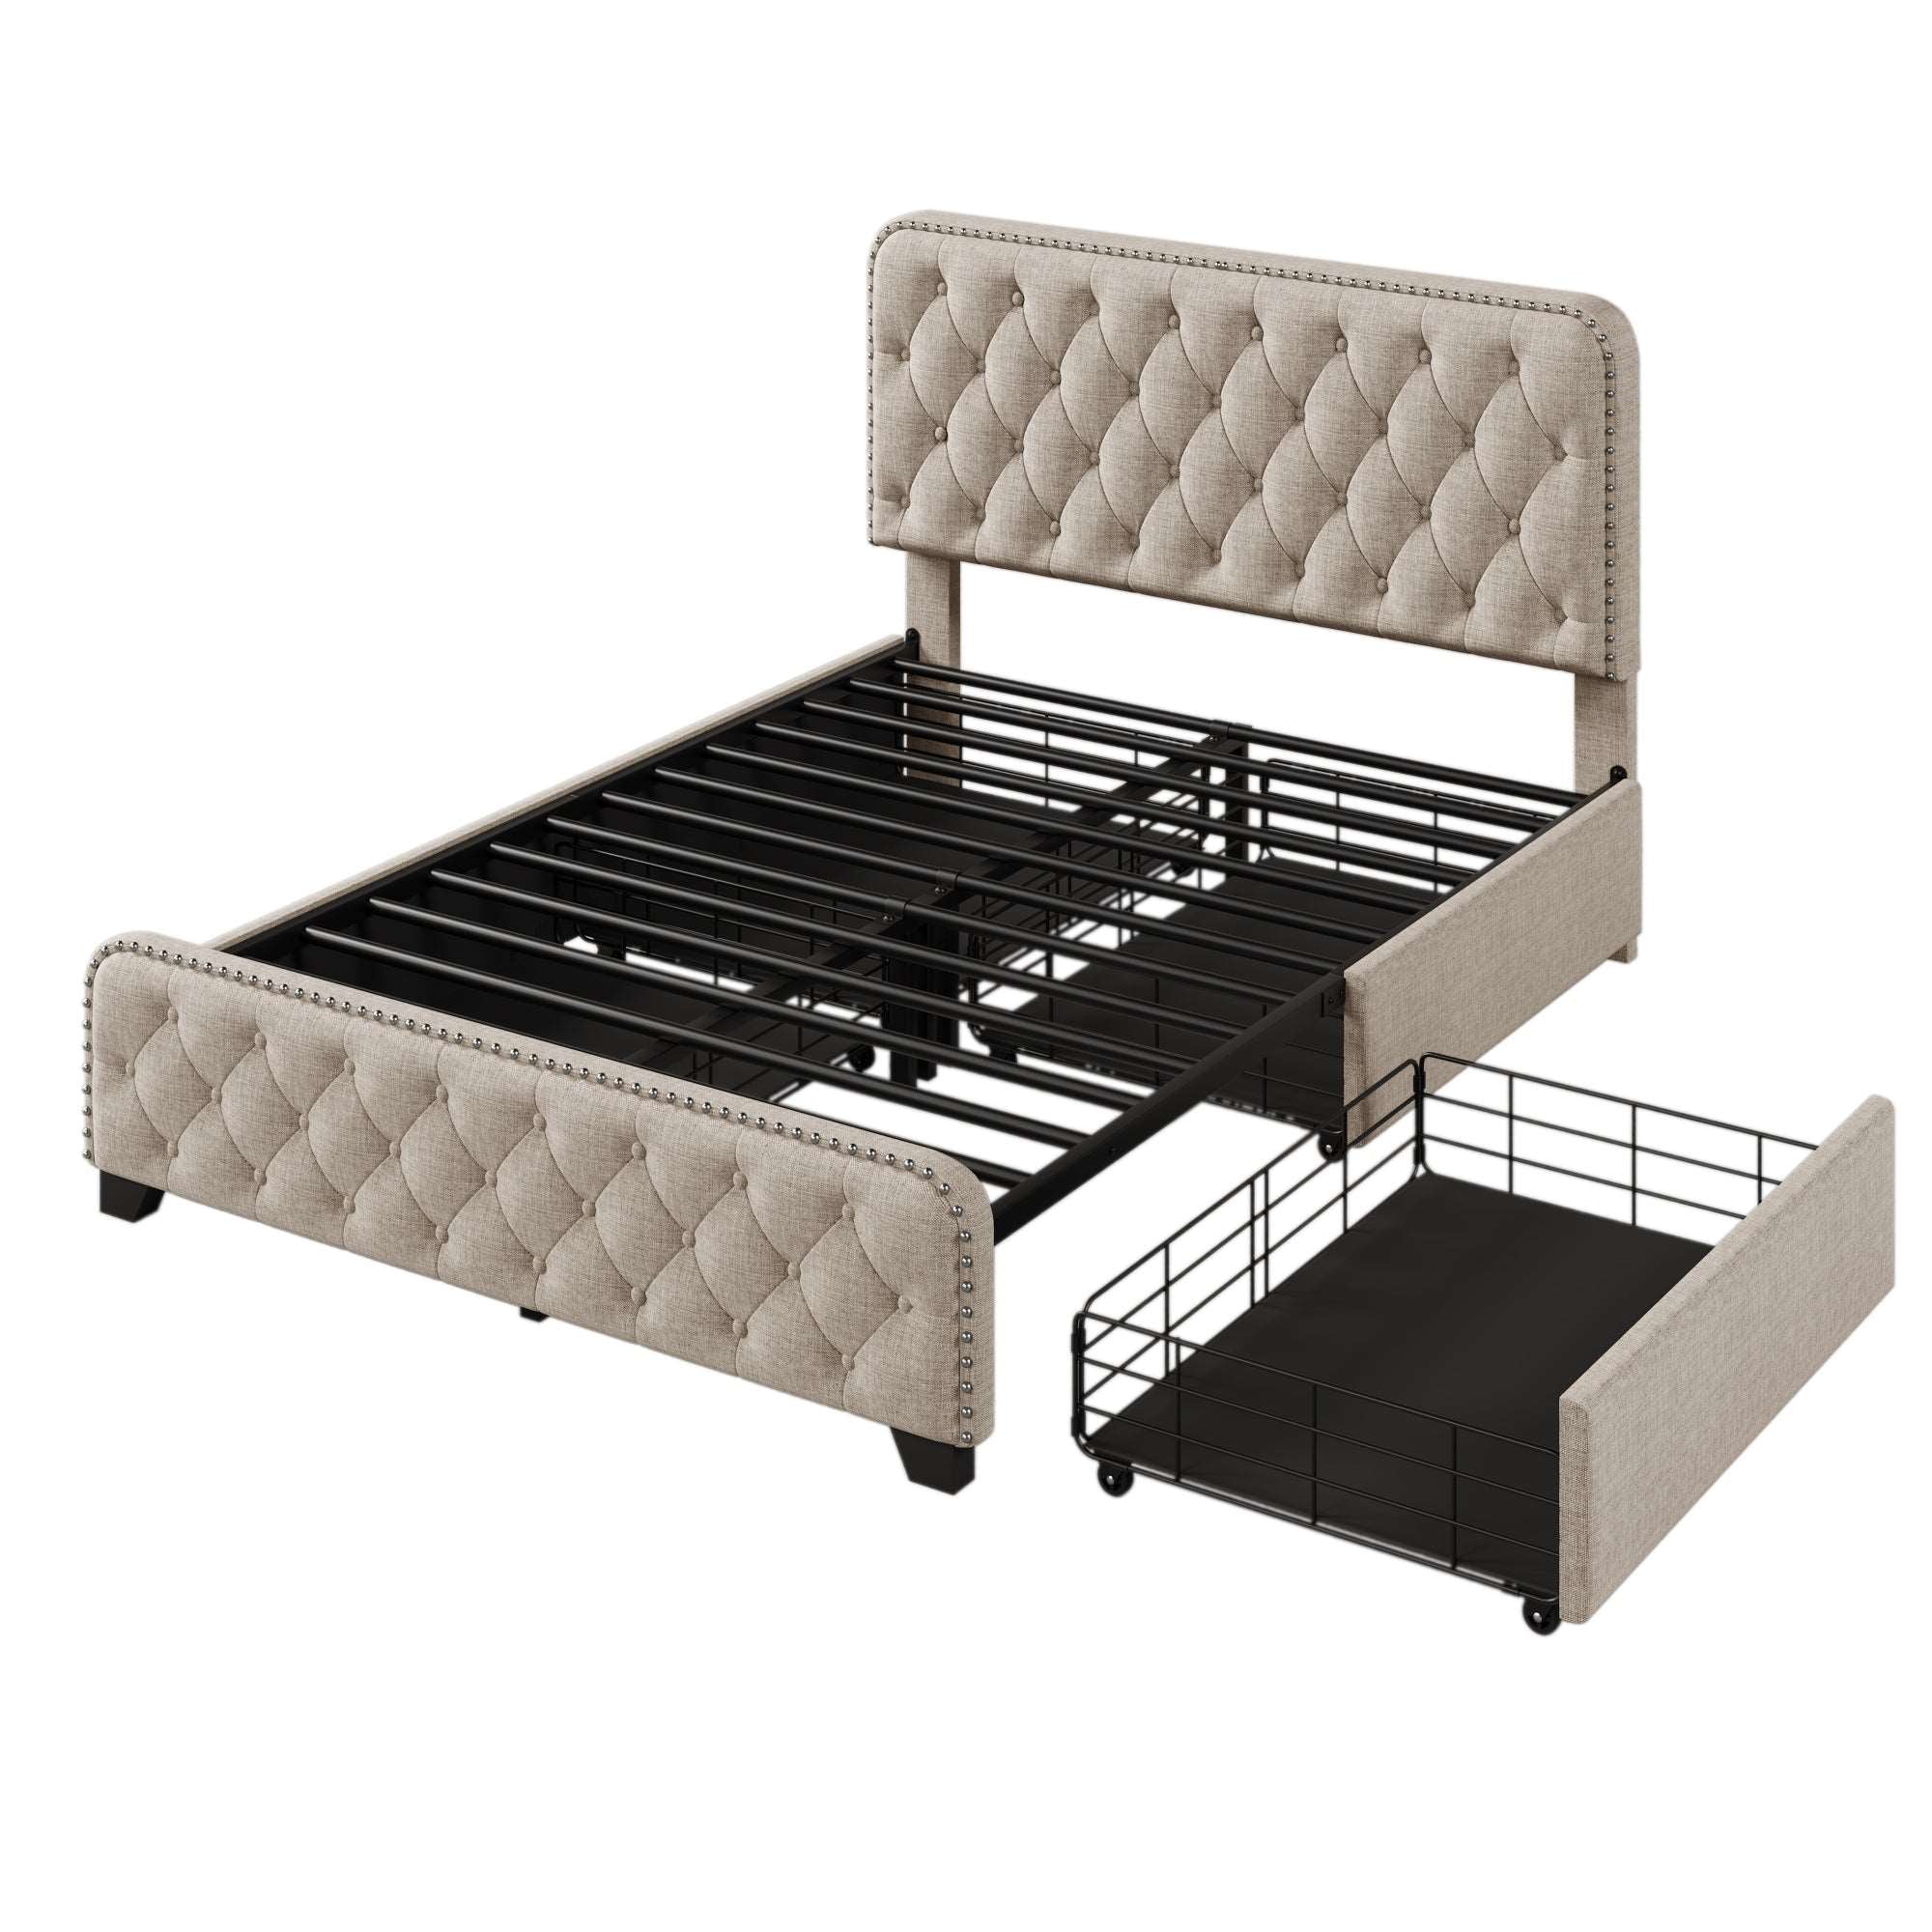 Bellemave Upholstered Platform Bed with 4 Drawers, Button Tufted Headboard and Footboard Sturdy Metal Support